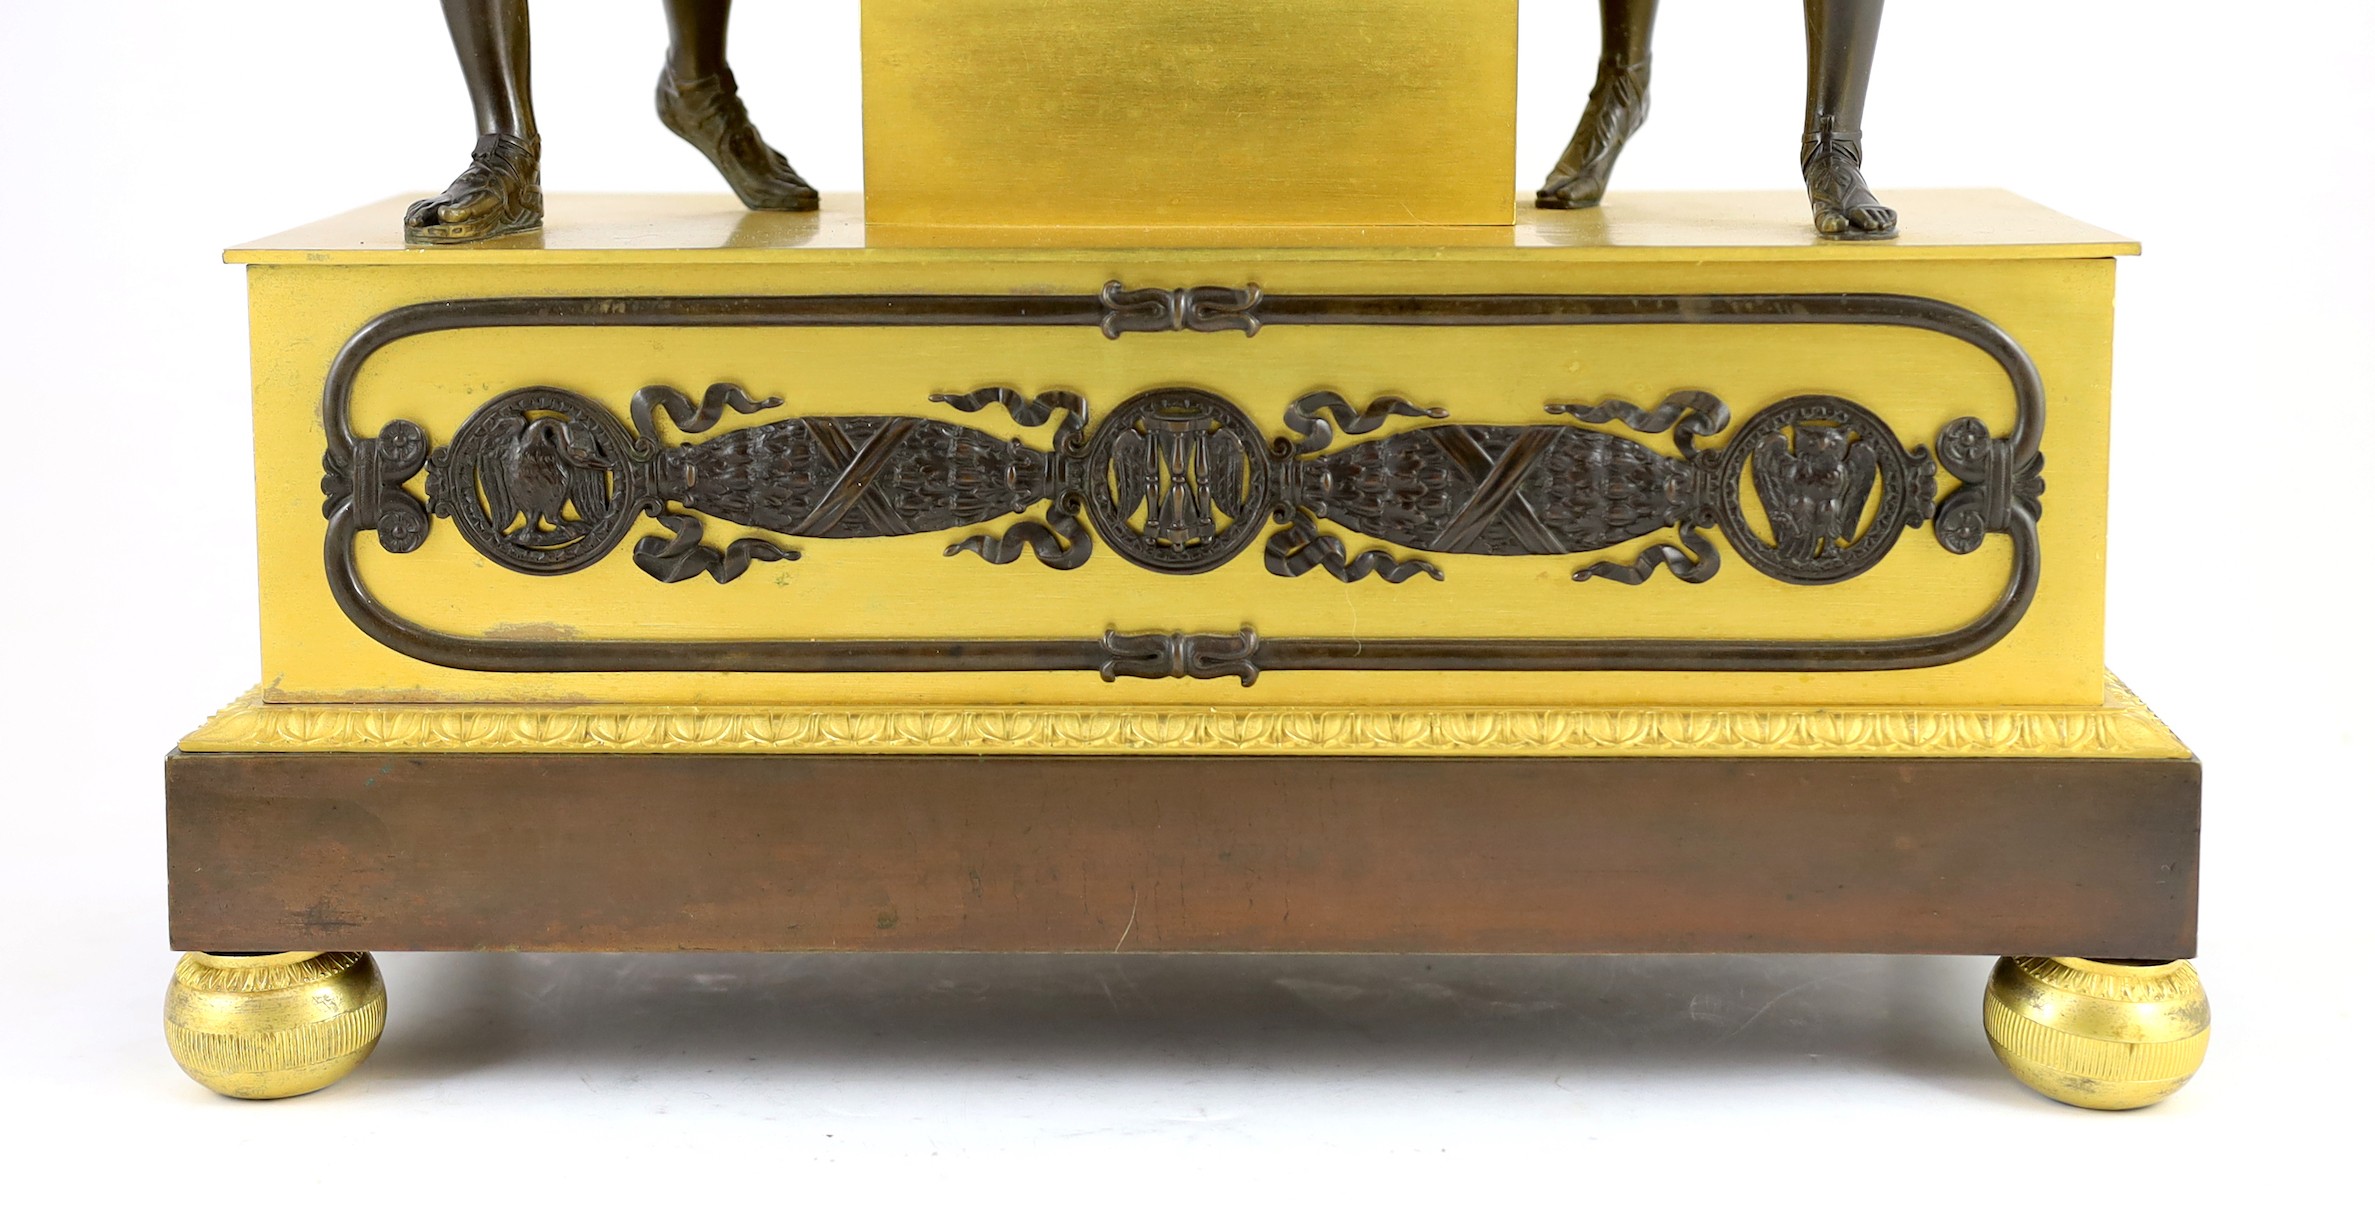 A 19th century French Louis XVI style bronze and ormolu mantel clock, surmounted with figures of - Image 3 of 5